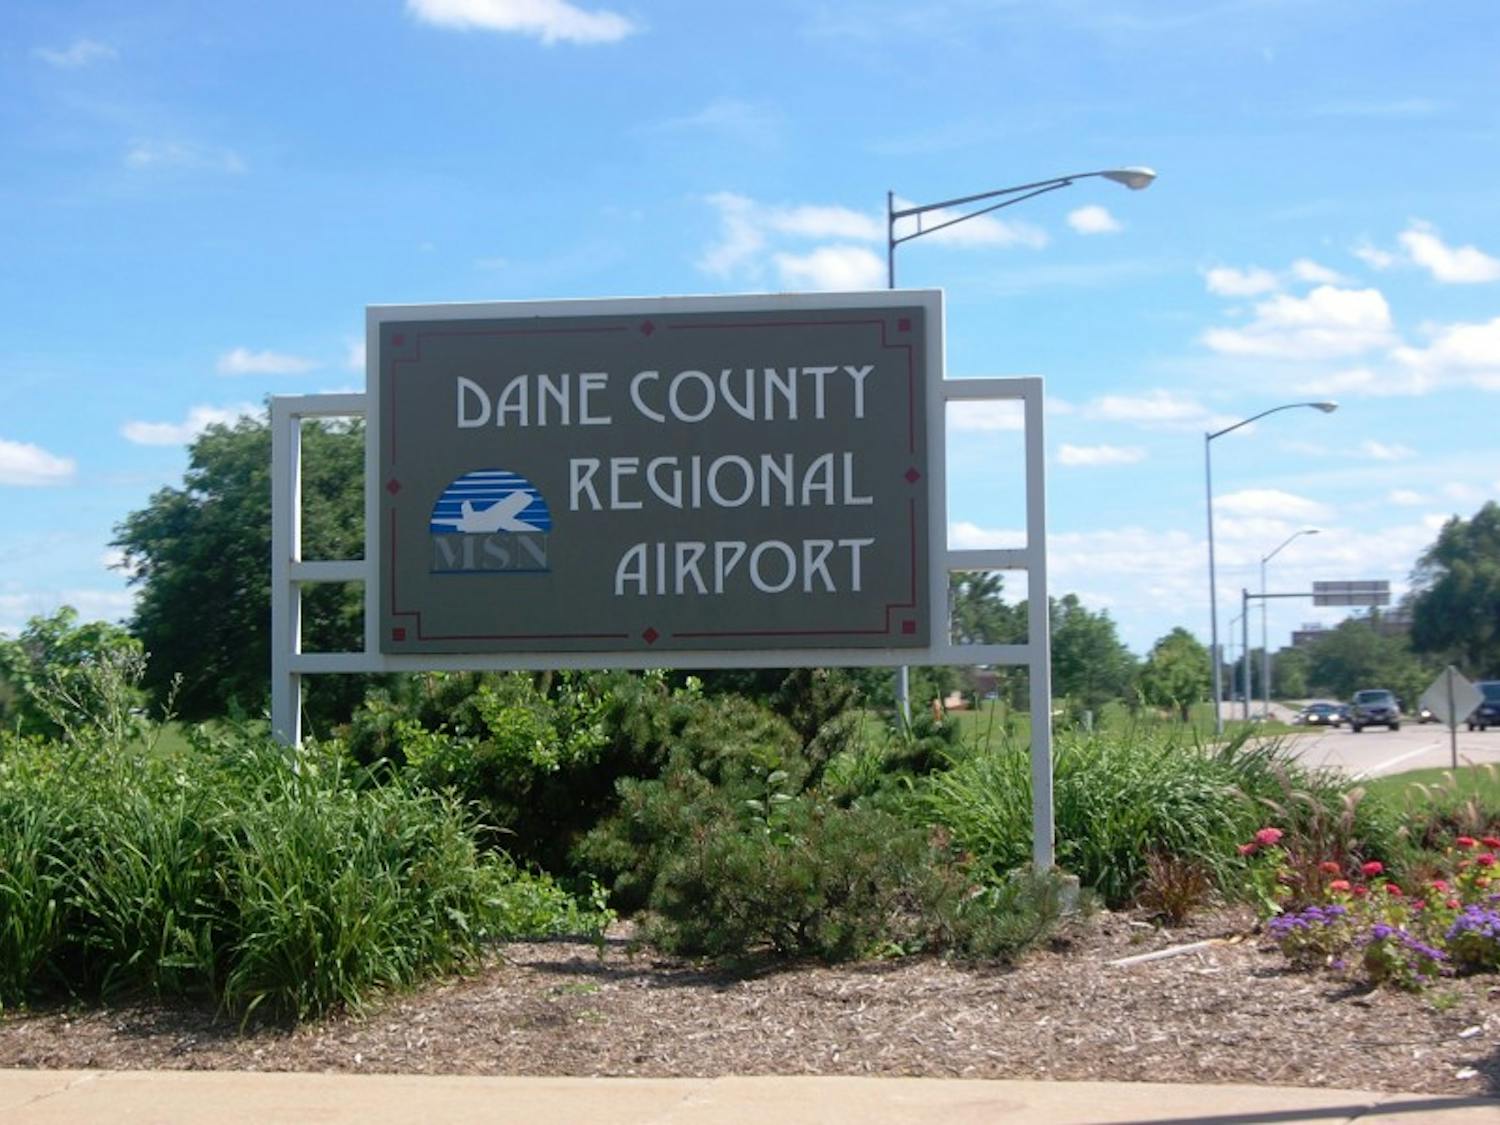 The Dane County Regional Airport had usage growth for the fourth consecutive year in 2017.&nbsp;